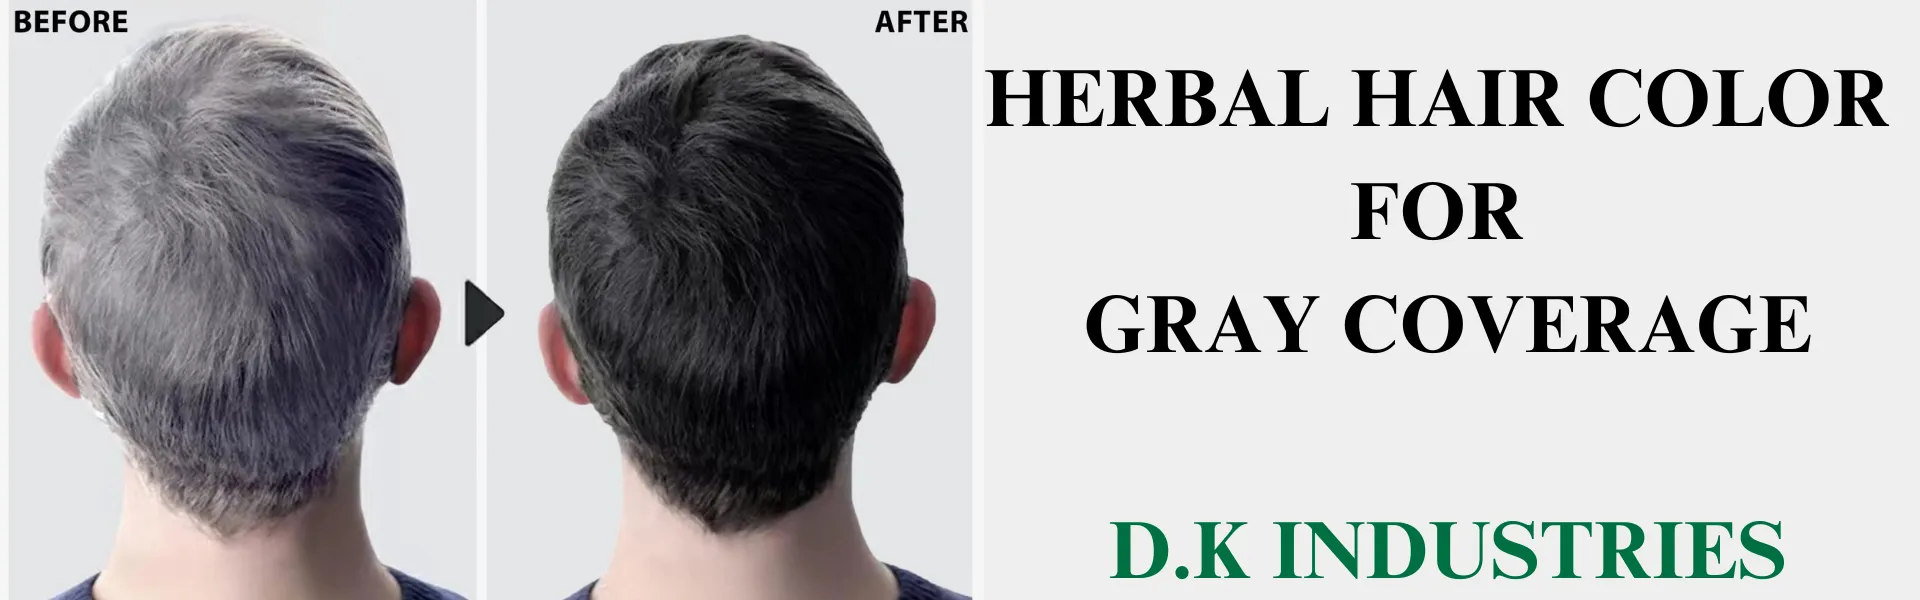 HERBAL HAIR COLOR FOR GRAY COVERAGE - www.dkihenna.com